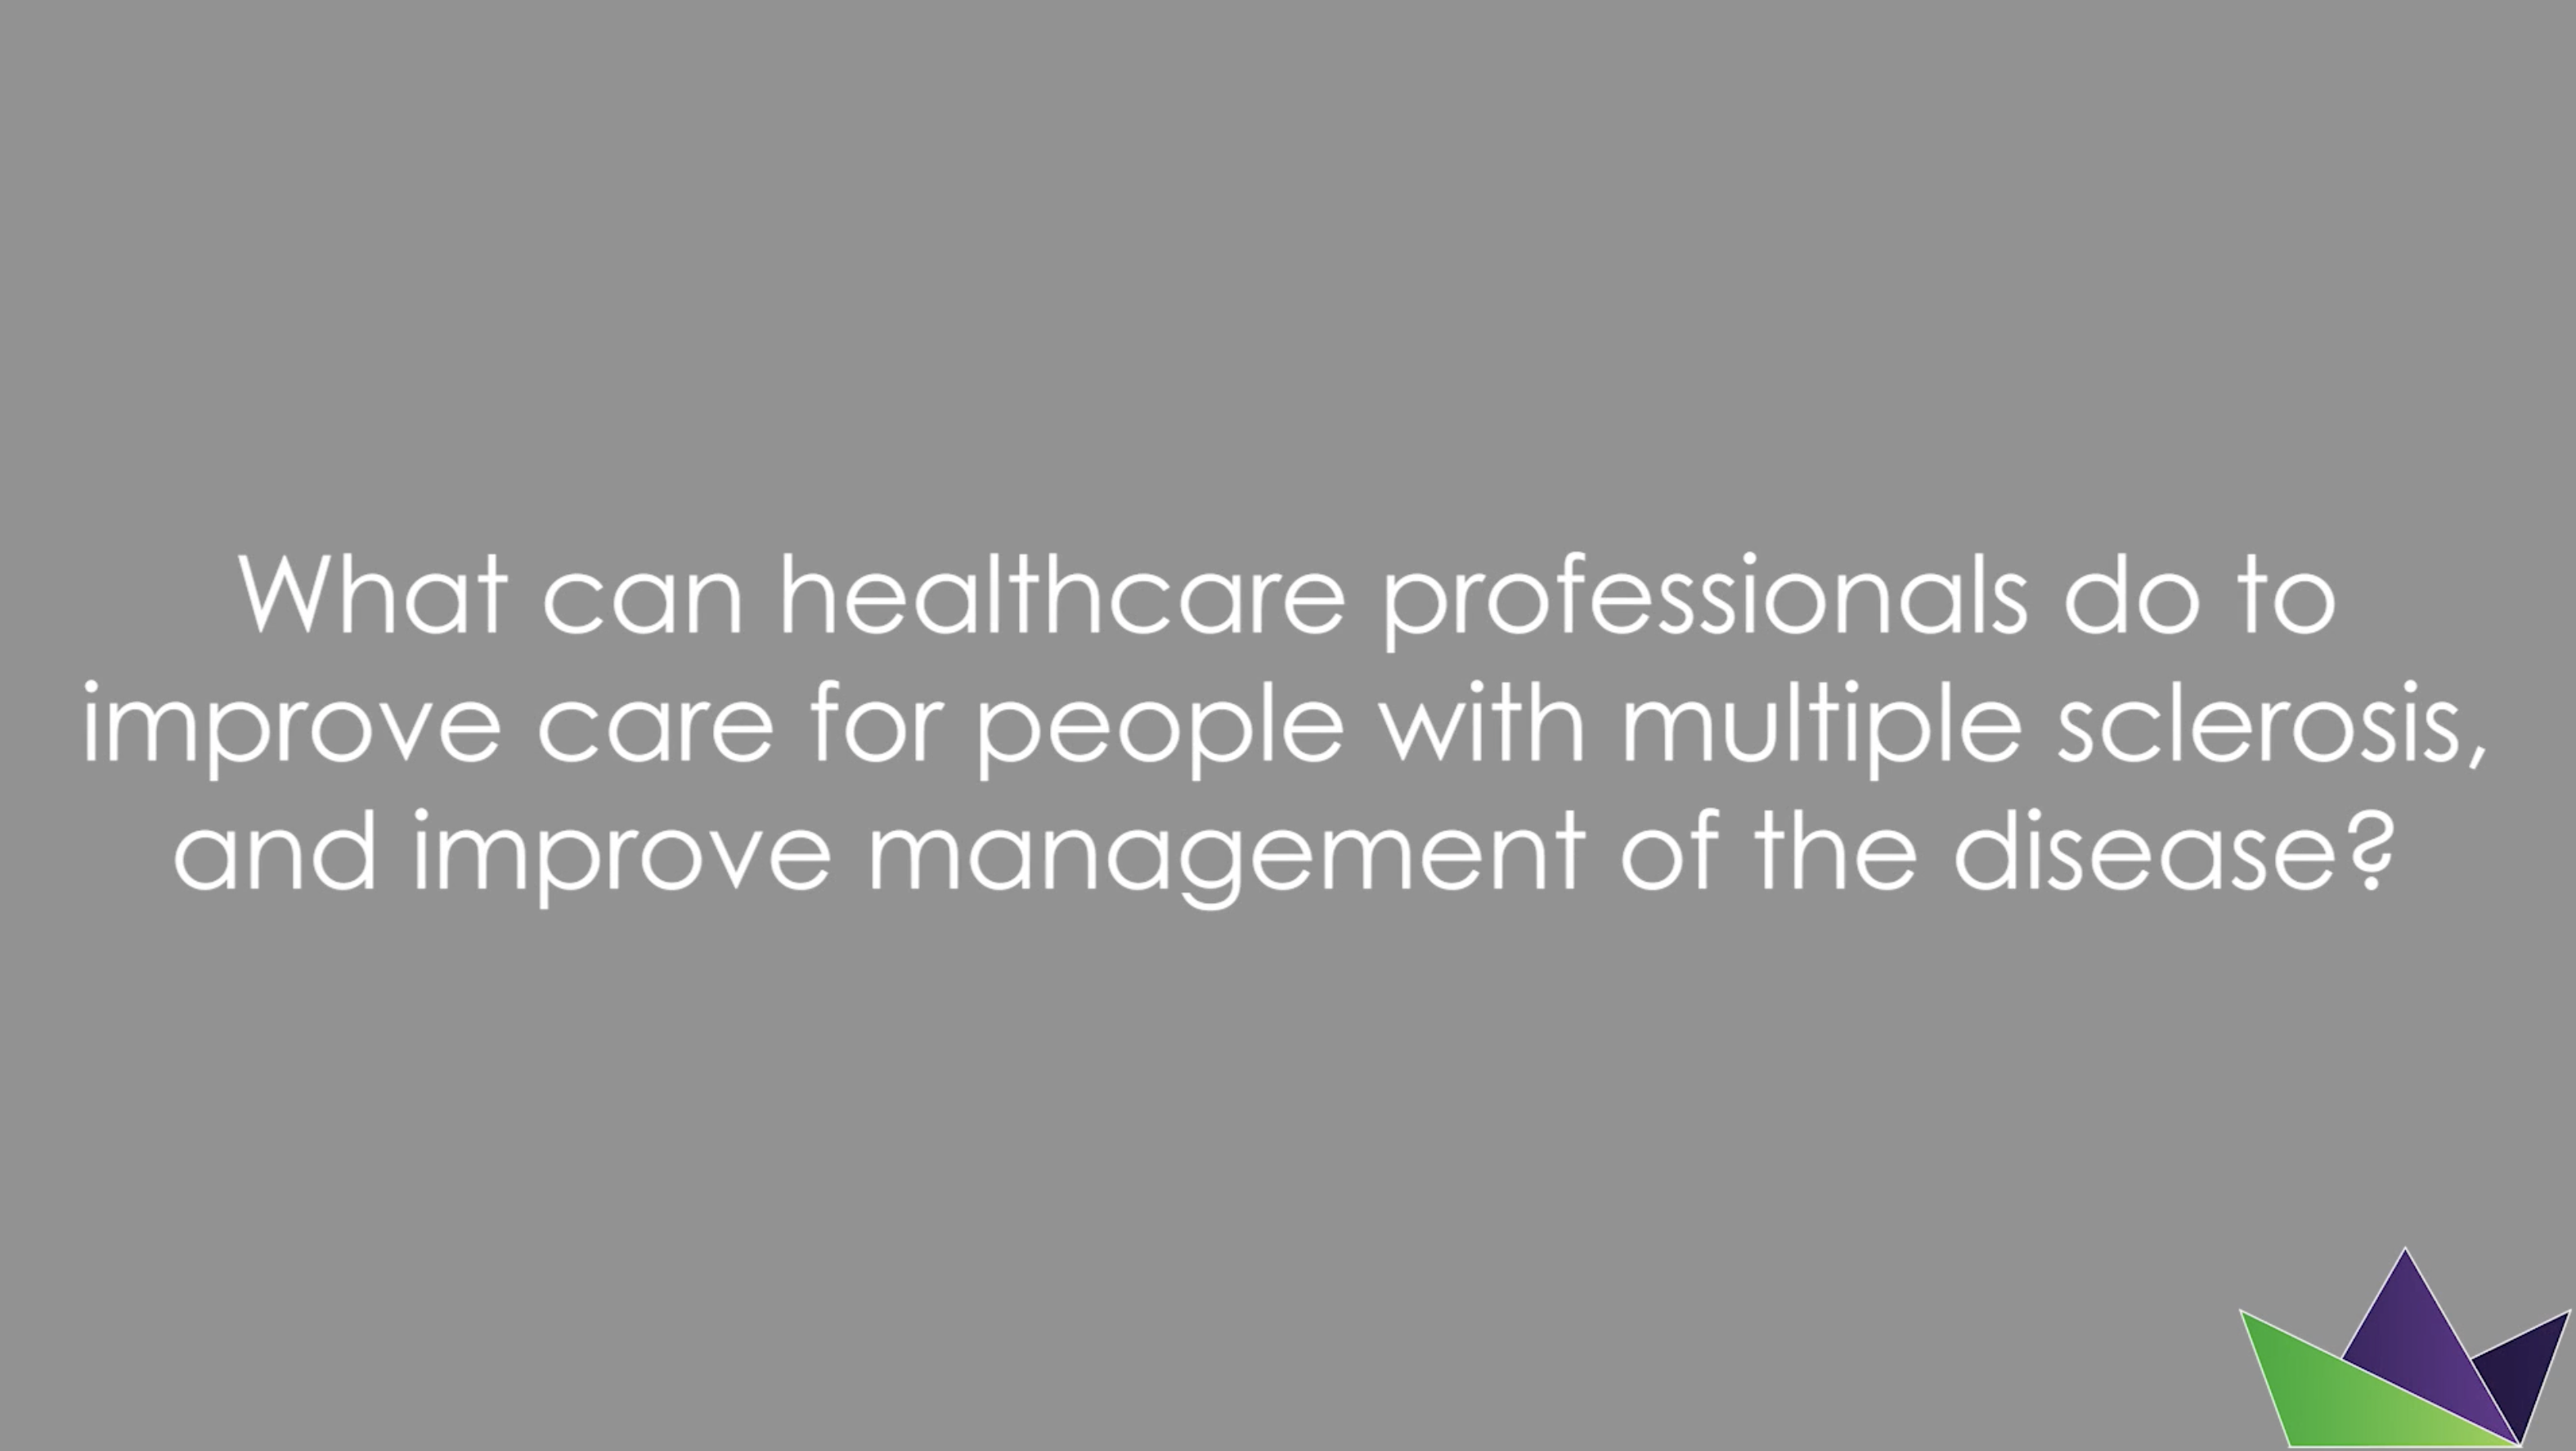 What can healthcare professionals do to improve care for people with multiple sclerosis, and improve management of the disease